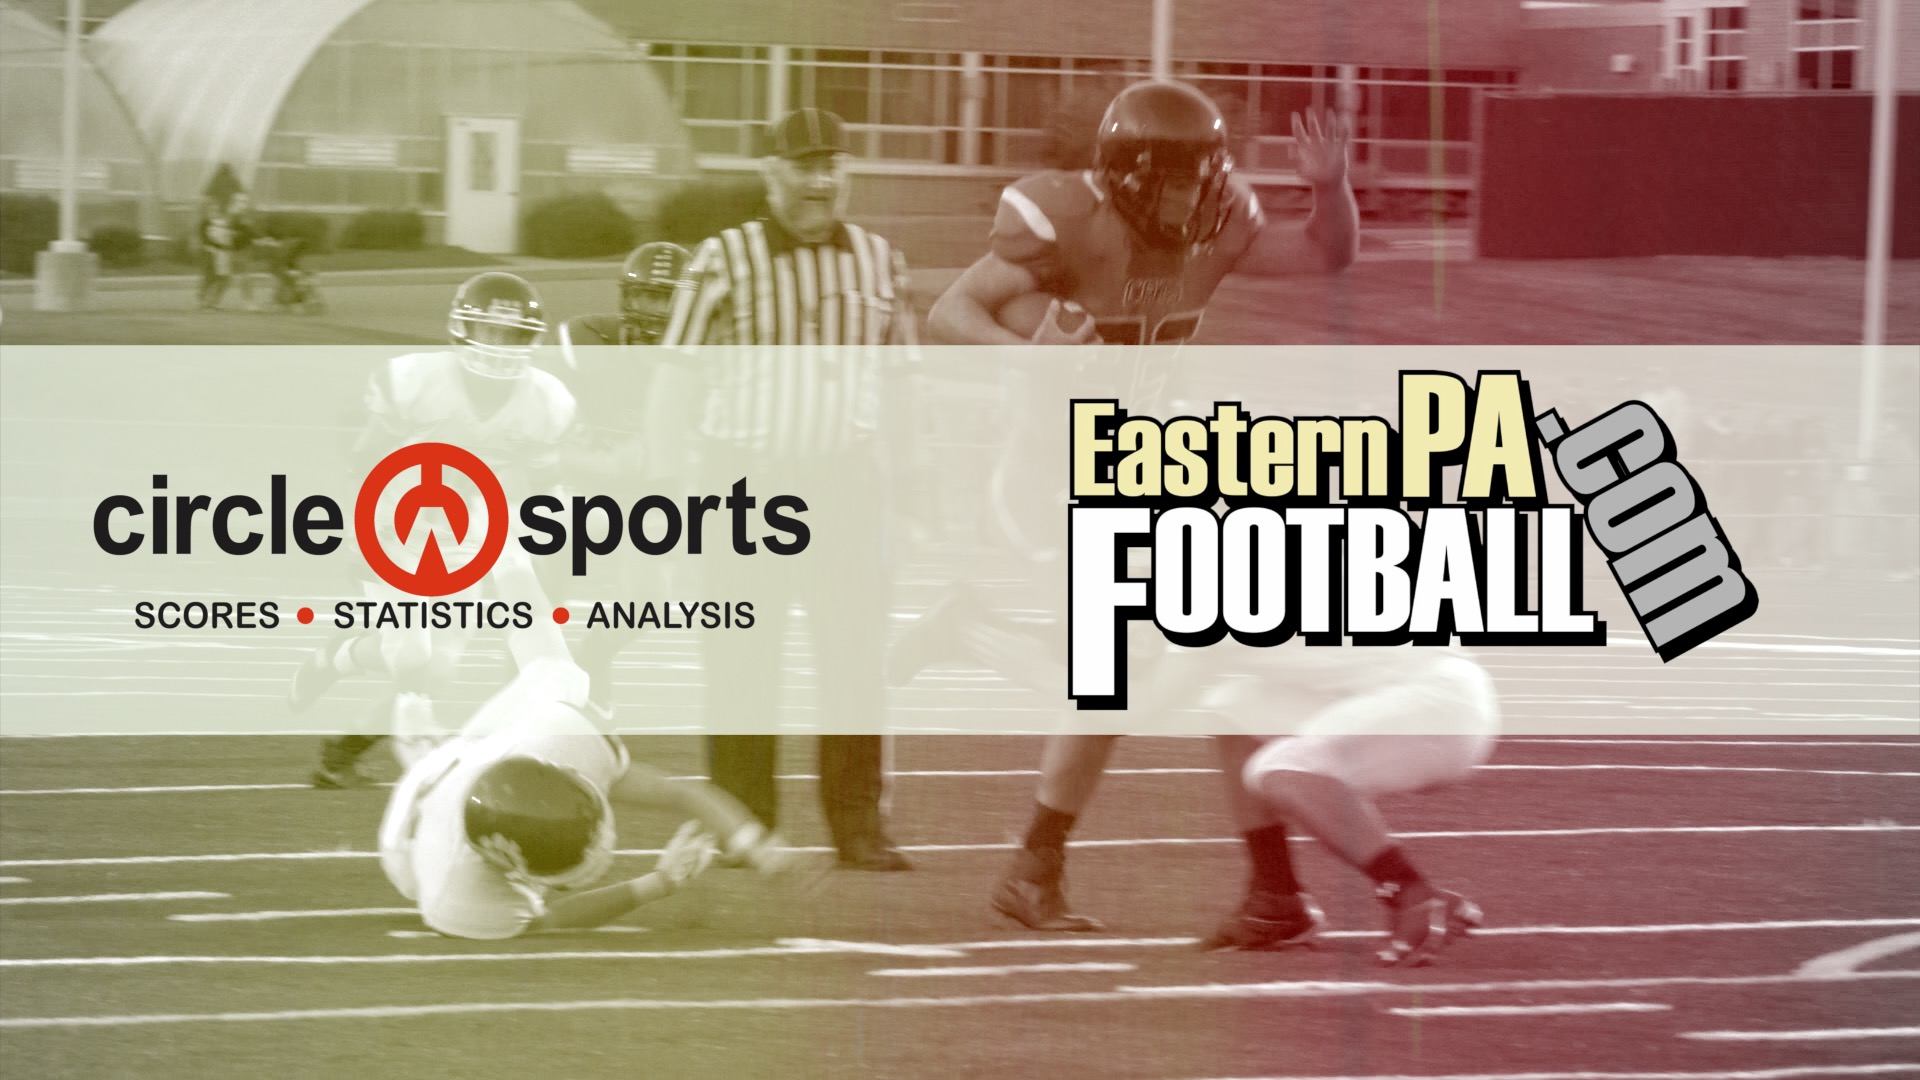 Circle W Sports partners with Eastern PA Football